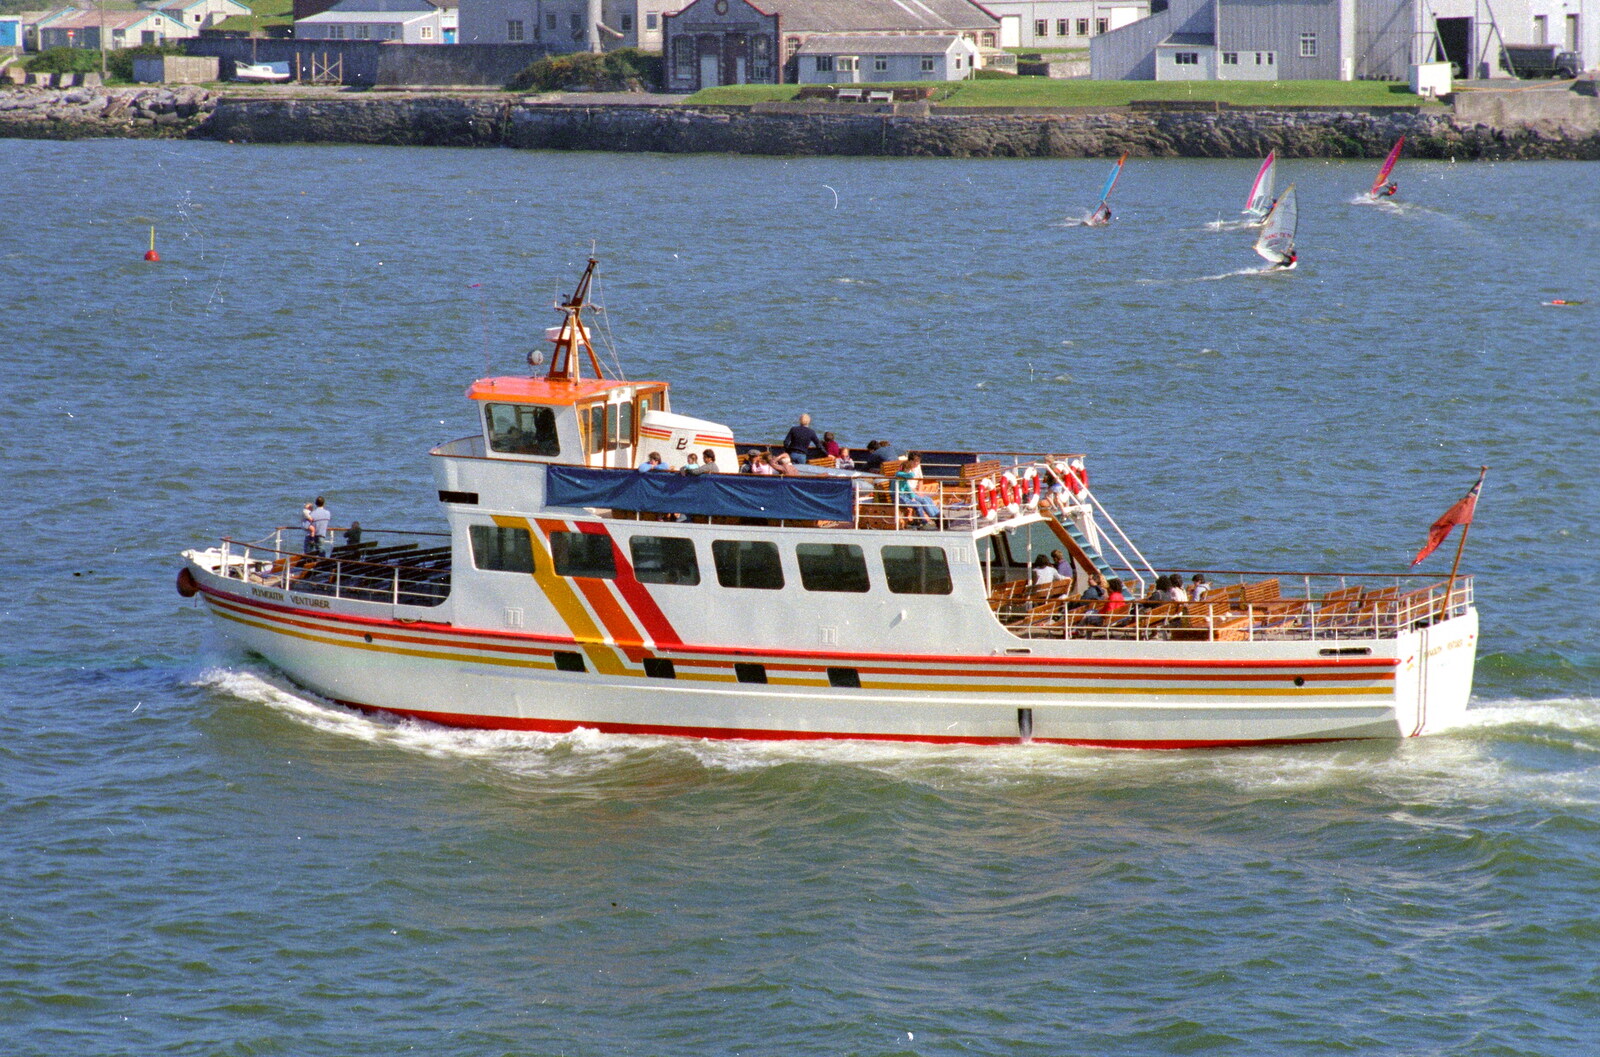 A Plymouth Sound 'booze cruise' boat from Uni: Student Politics, and Hanging Around The Hoe, Plymouth - 12th April 1986